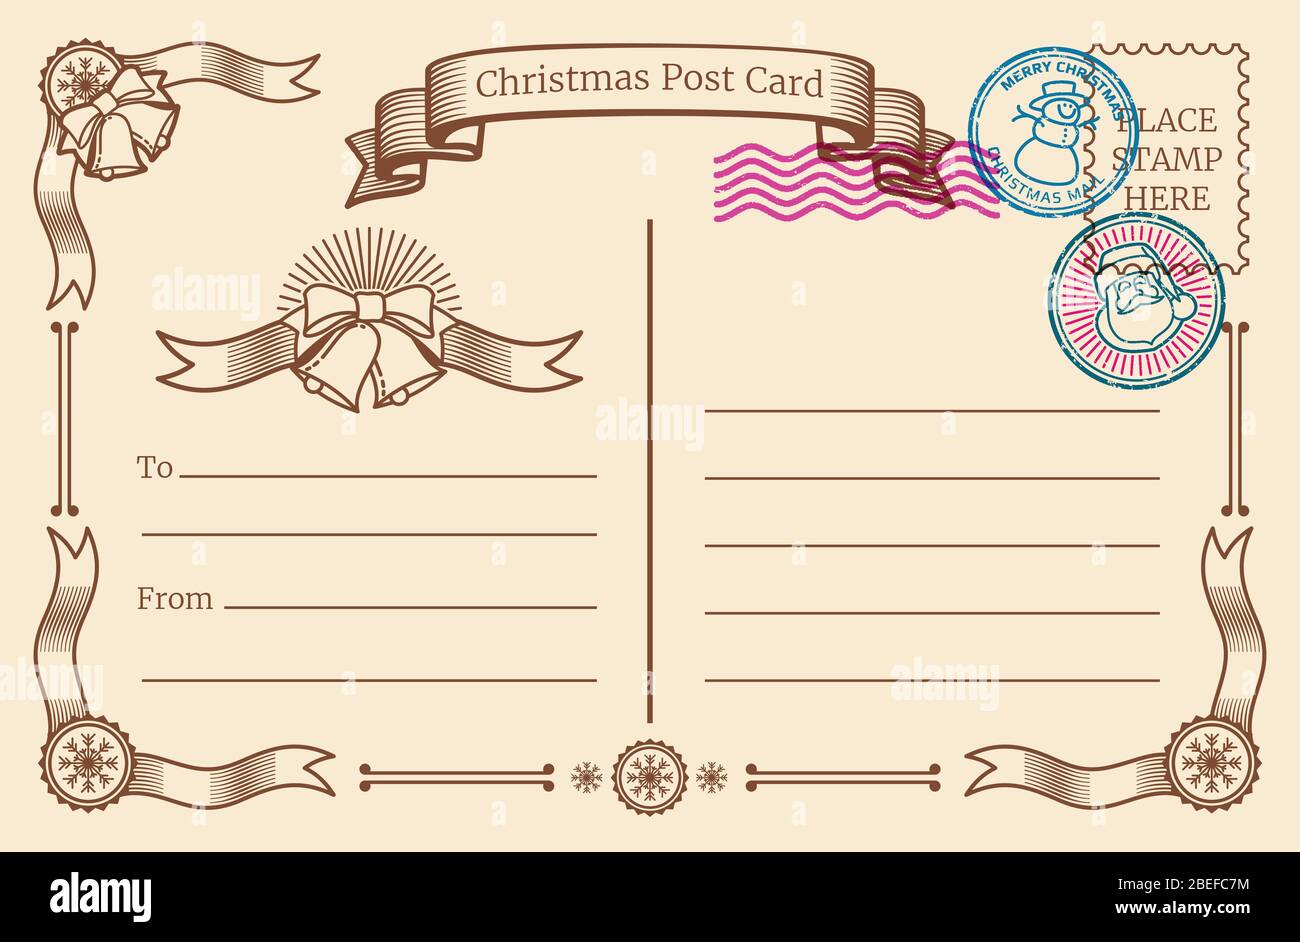 Postcard template. Paper blank postal card backside with stamp and